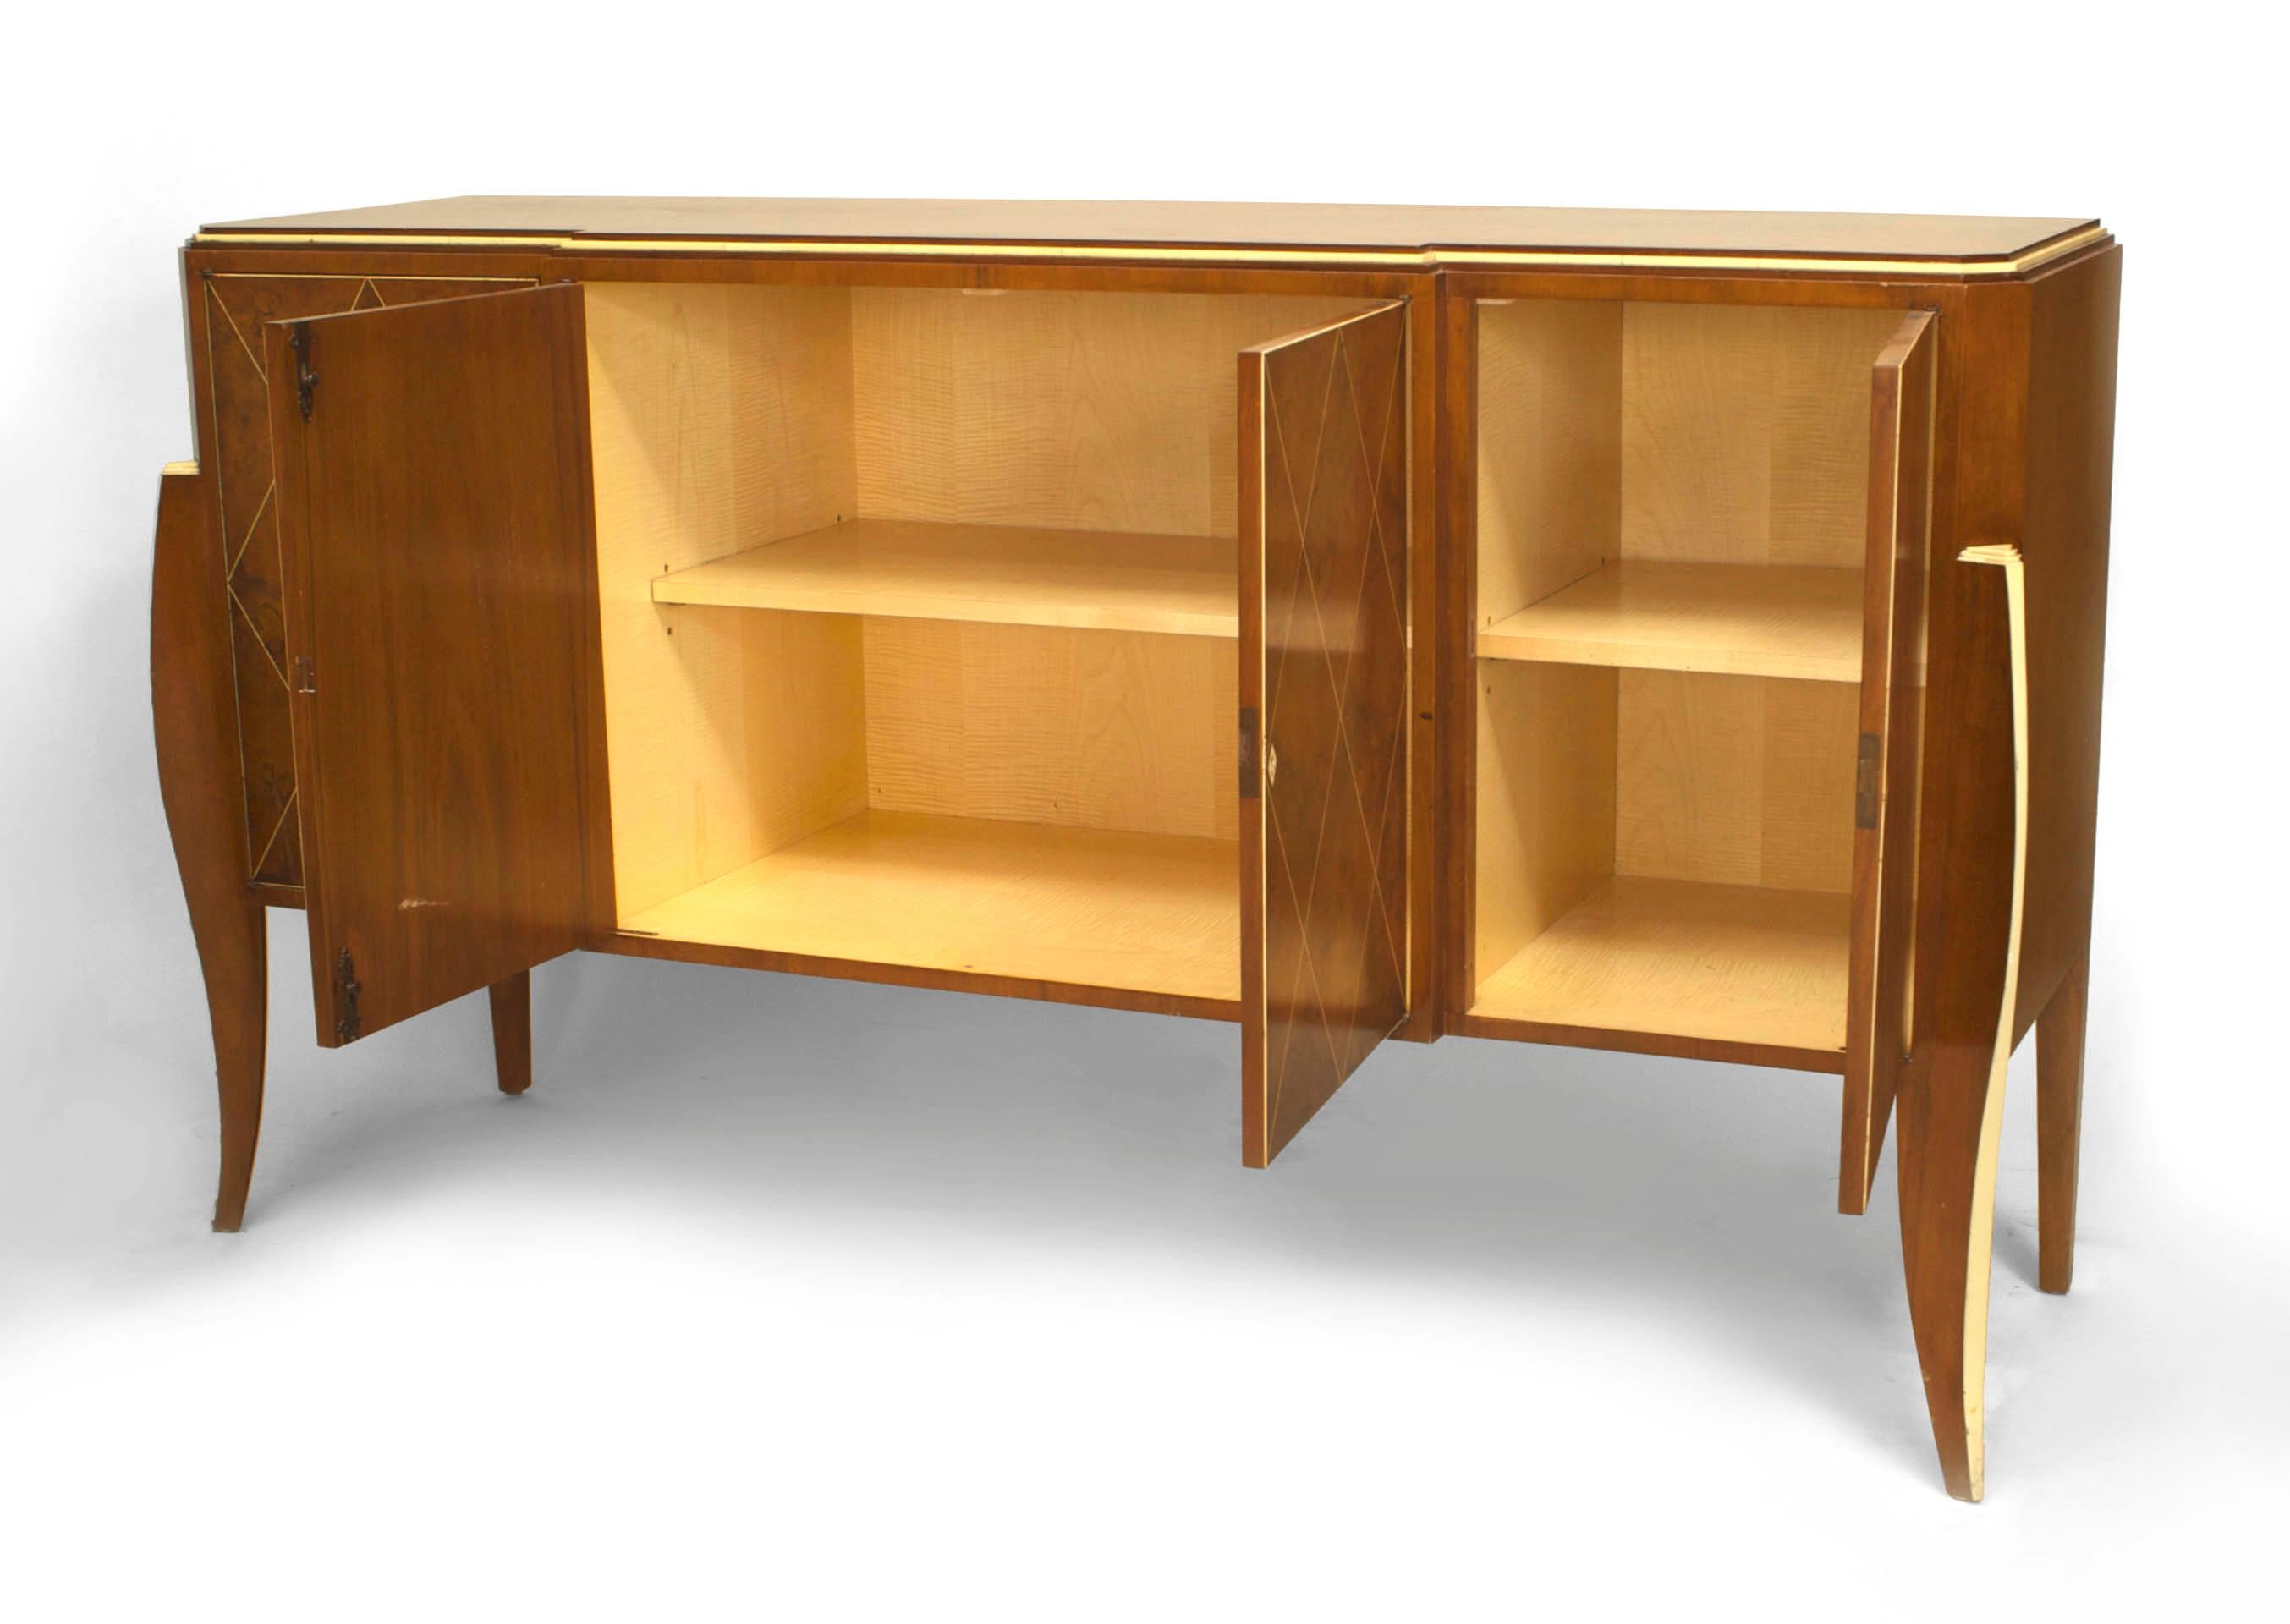 French Art Deco style amboyna wood 4 door sideboard with inlaid diamond design and trim.
